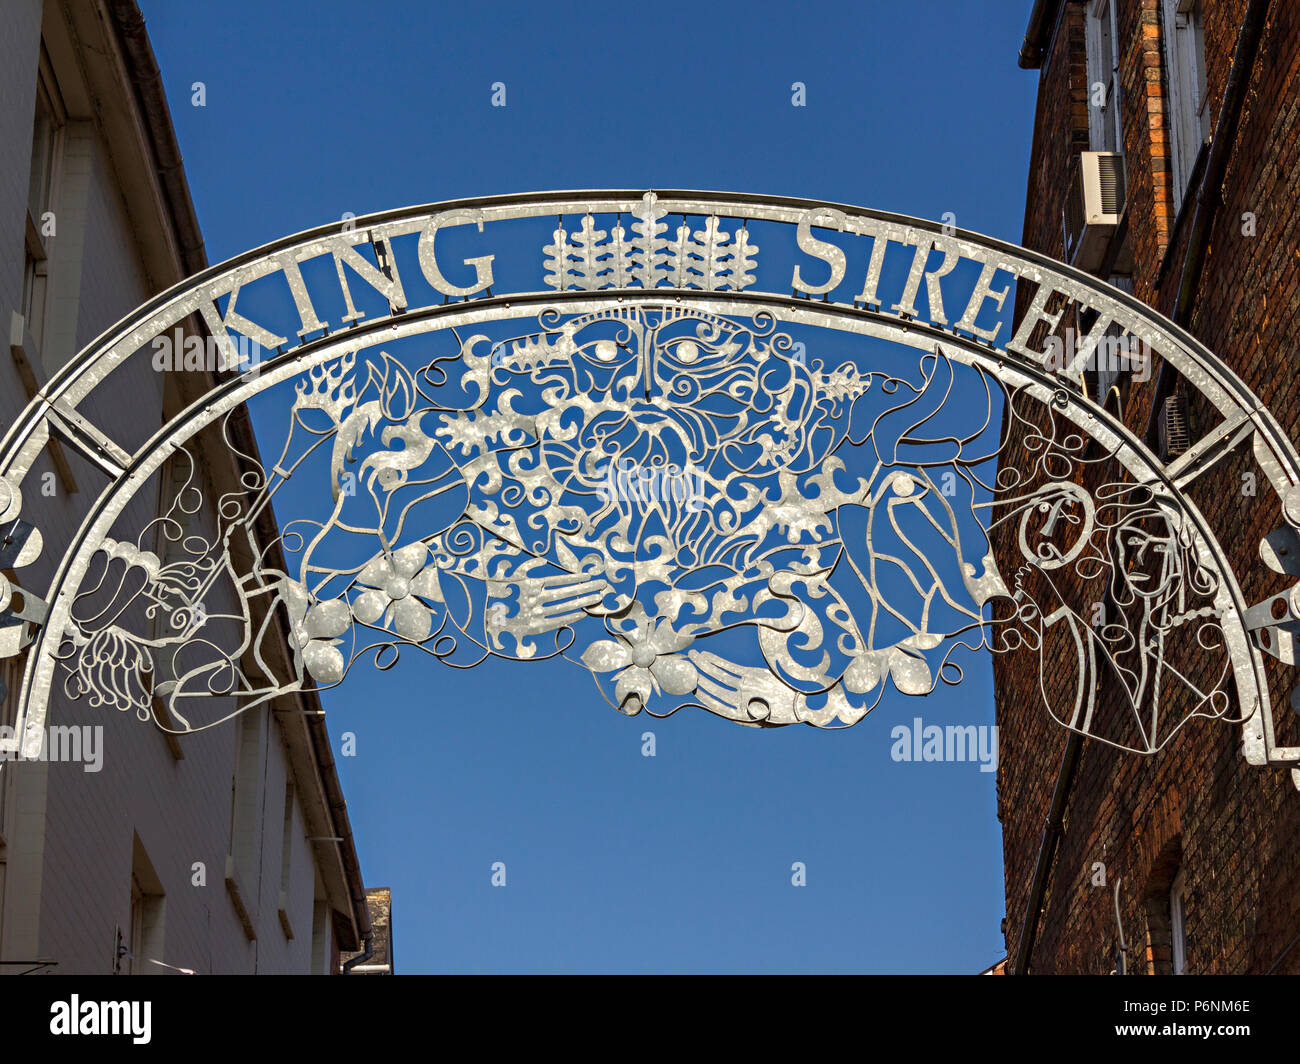 Ornate, galvanised metal arch street sign with tracery above King Street by artist Ben Coode-Adams, Melton Mowbray, Leicestershire, England, UK Stock Photo